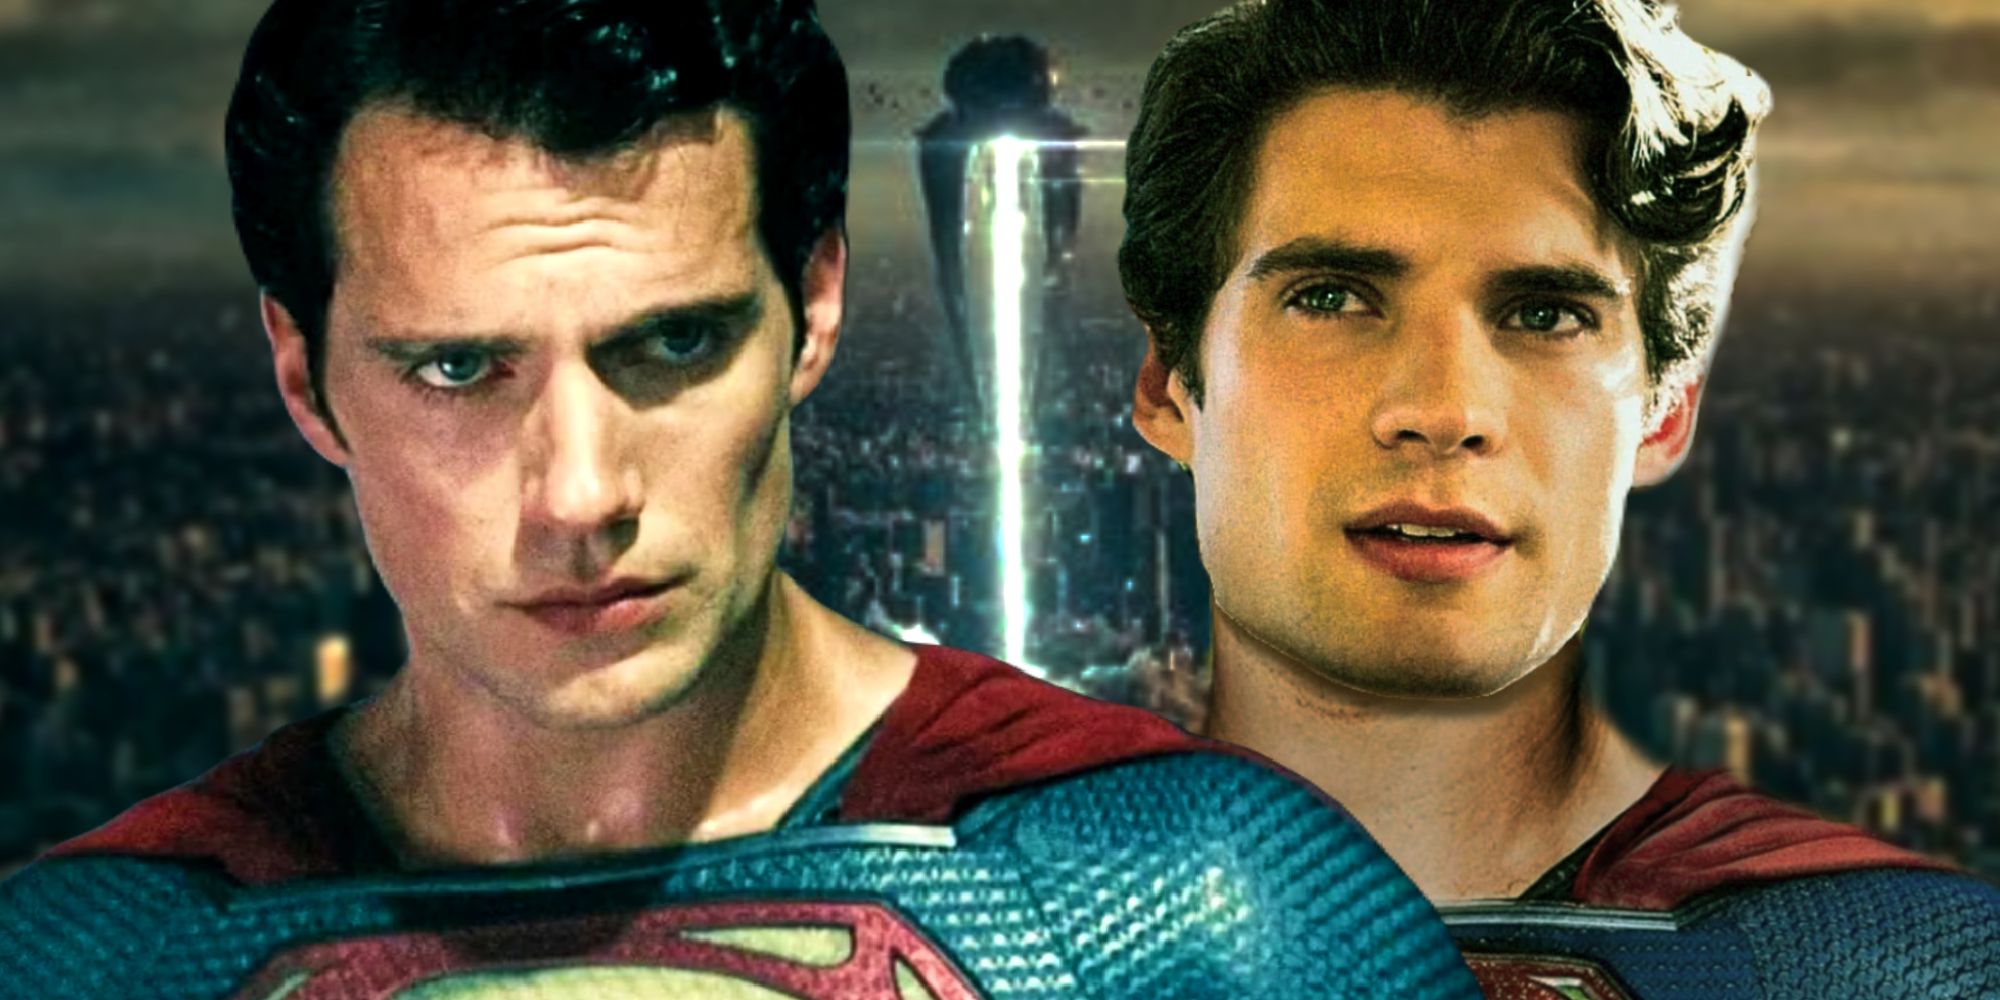 Man Of Steel 2: 9 Comic Villains Who Could Appear In The Superman Movie